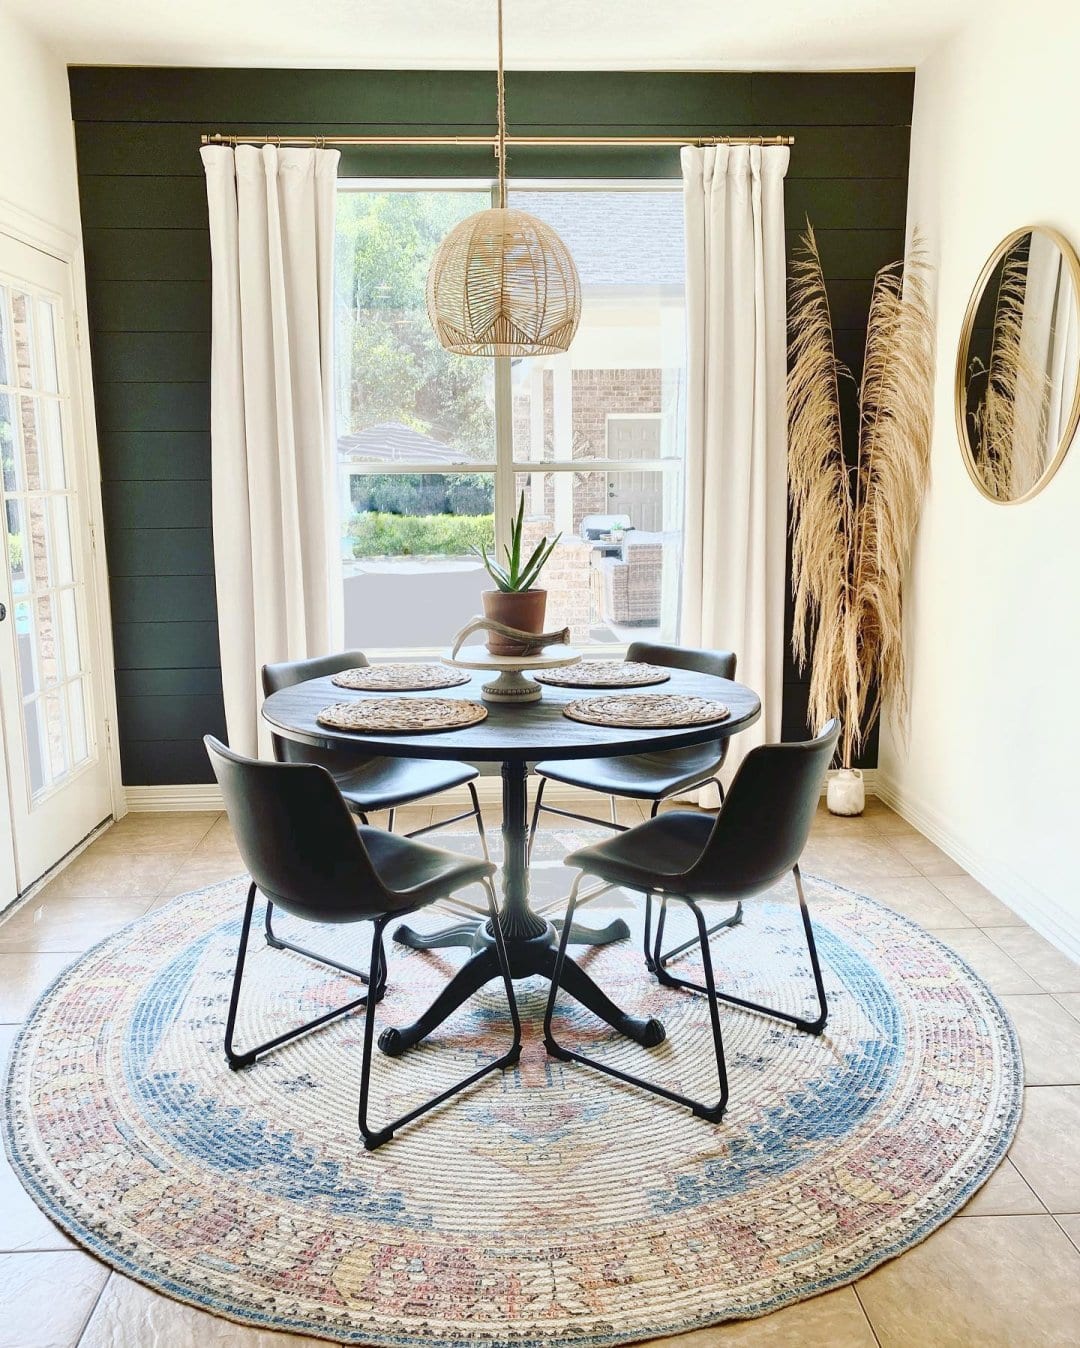 How To Decorate A Round Dining Table, Runner For Round Dining Table